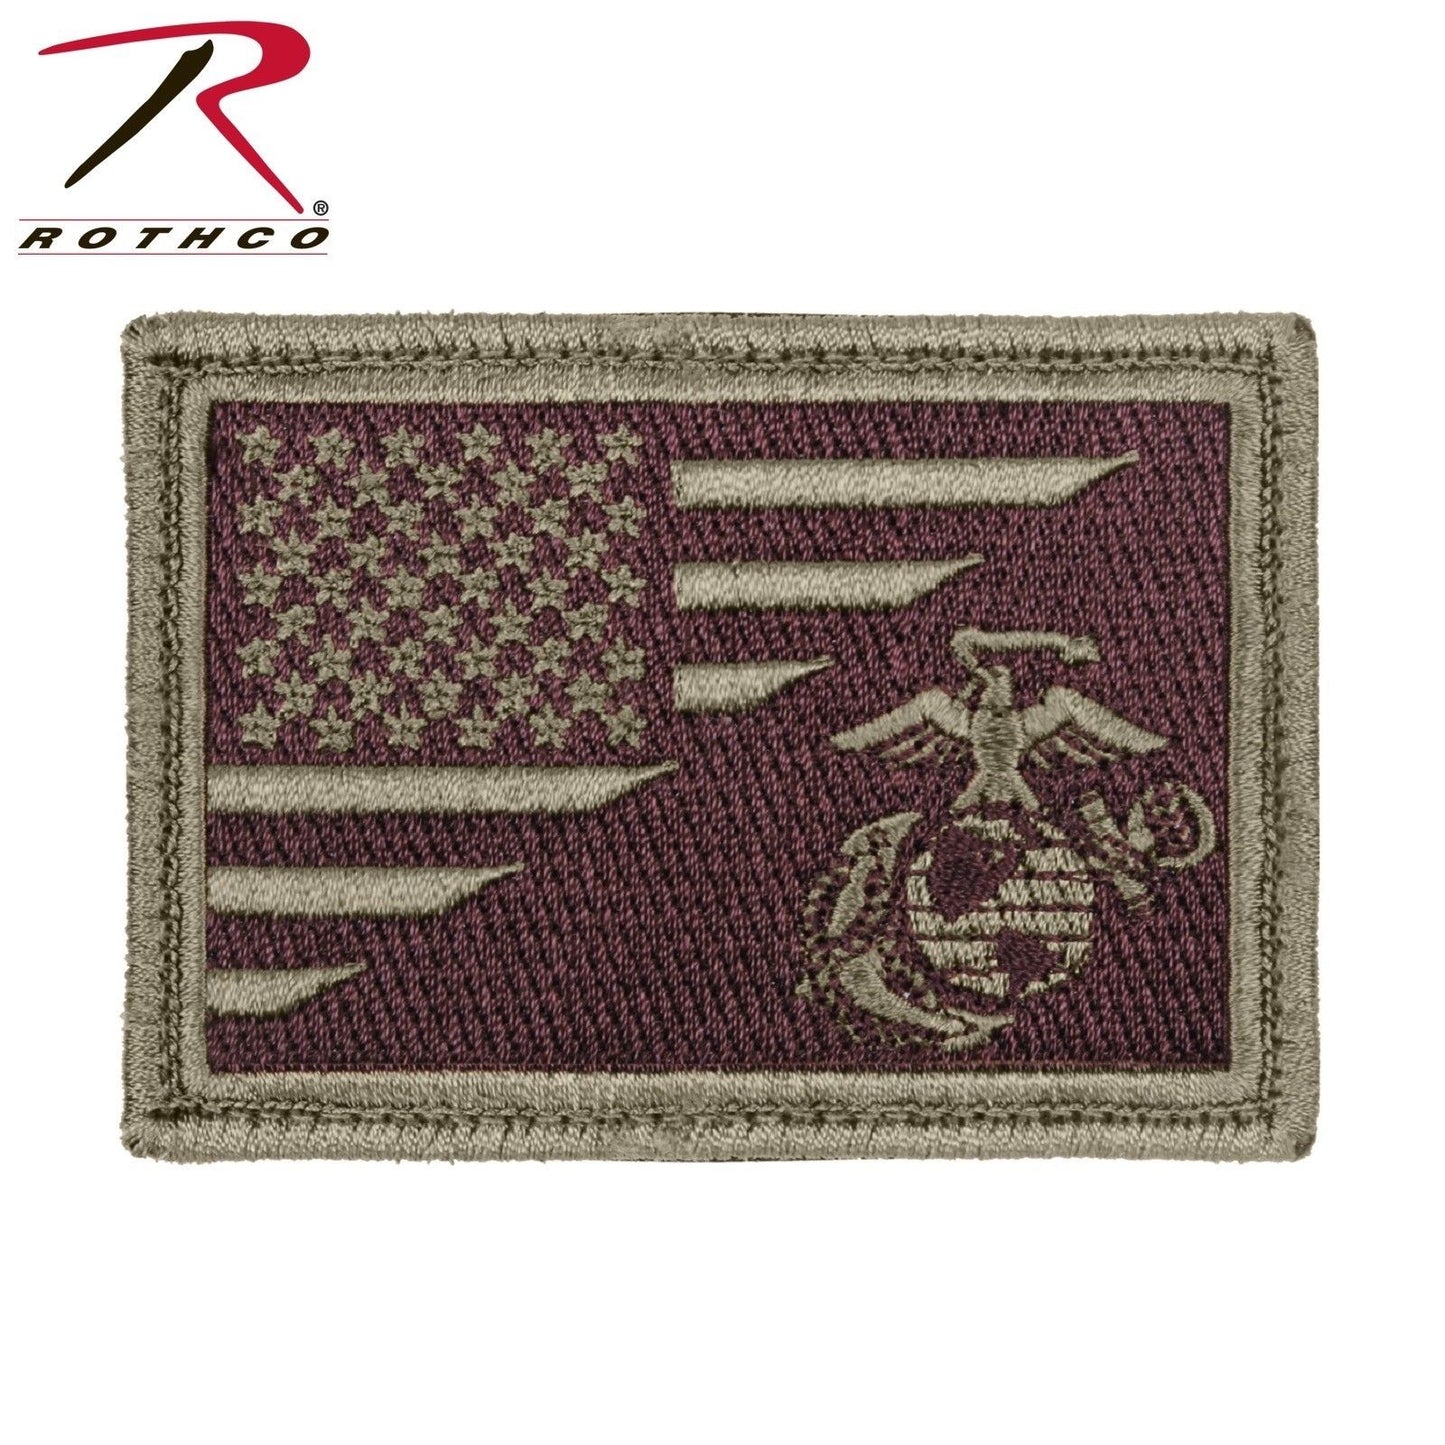 Rothco US Flag / USMC Globe and Anchor Morale Patch - Hook & Loop Patch